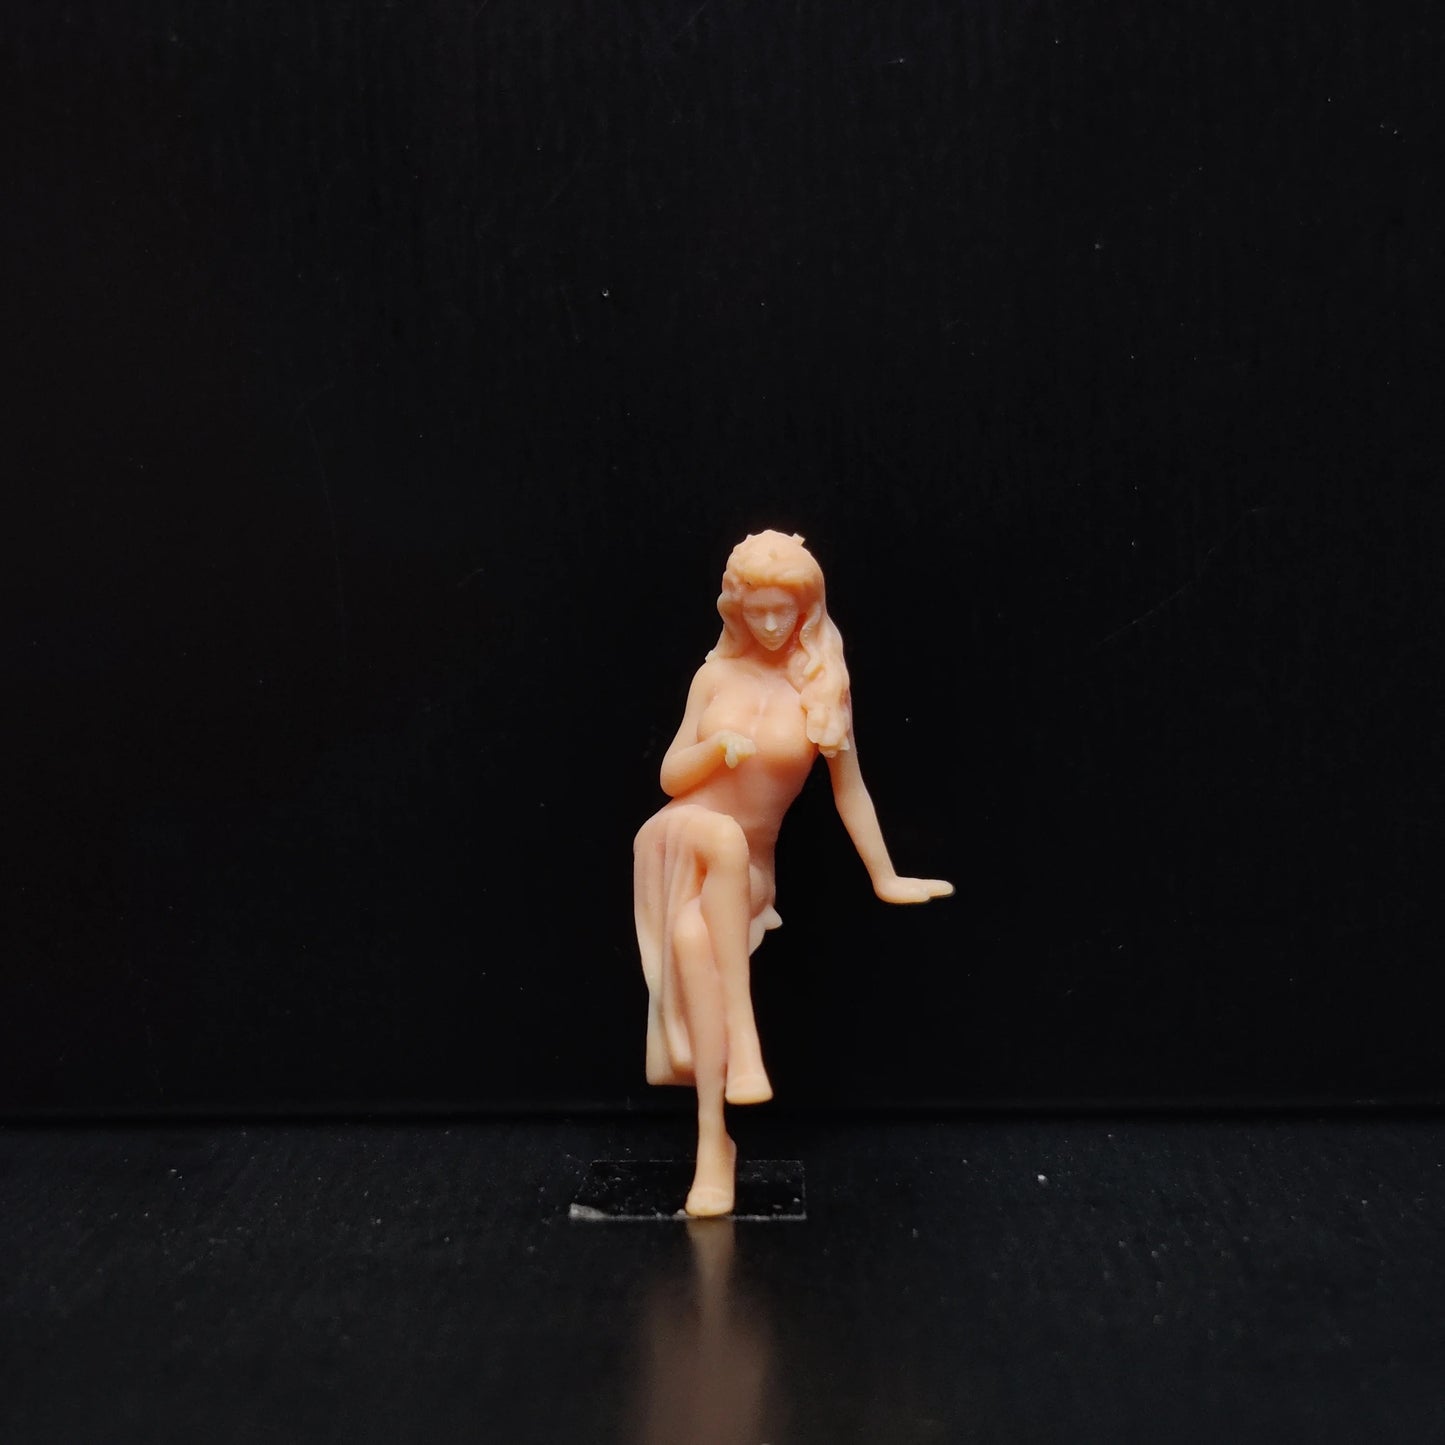 1/64 1/43 Scale Model ResinFemale with Sitting Posture and Textured FeetUncolored Miniature Diorama Hand-painted T524